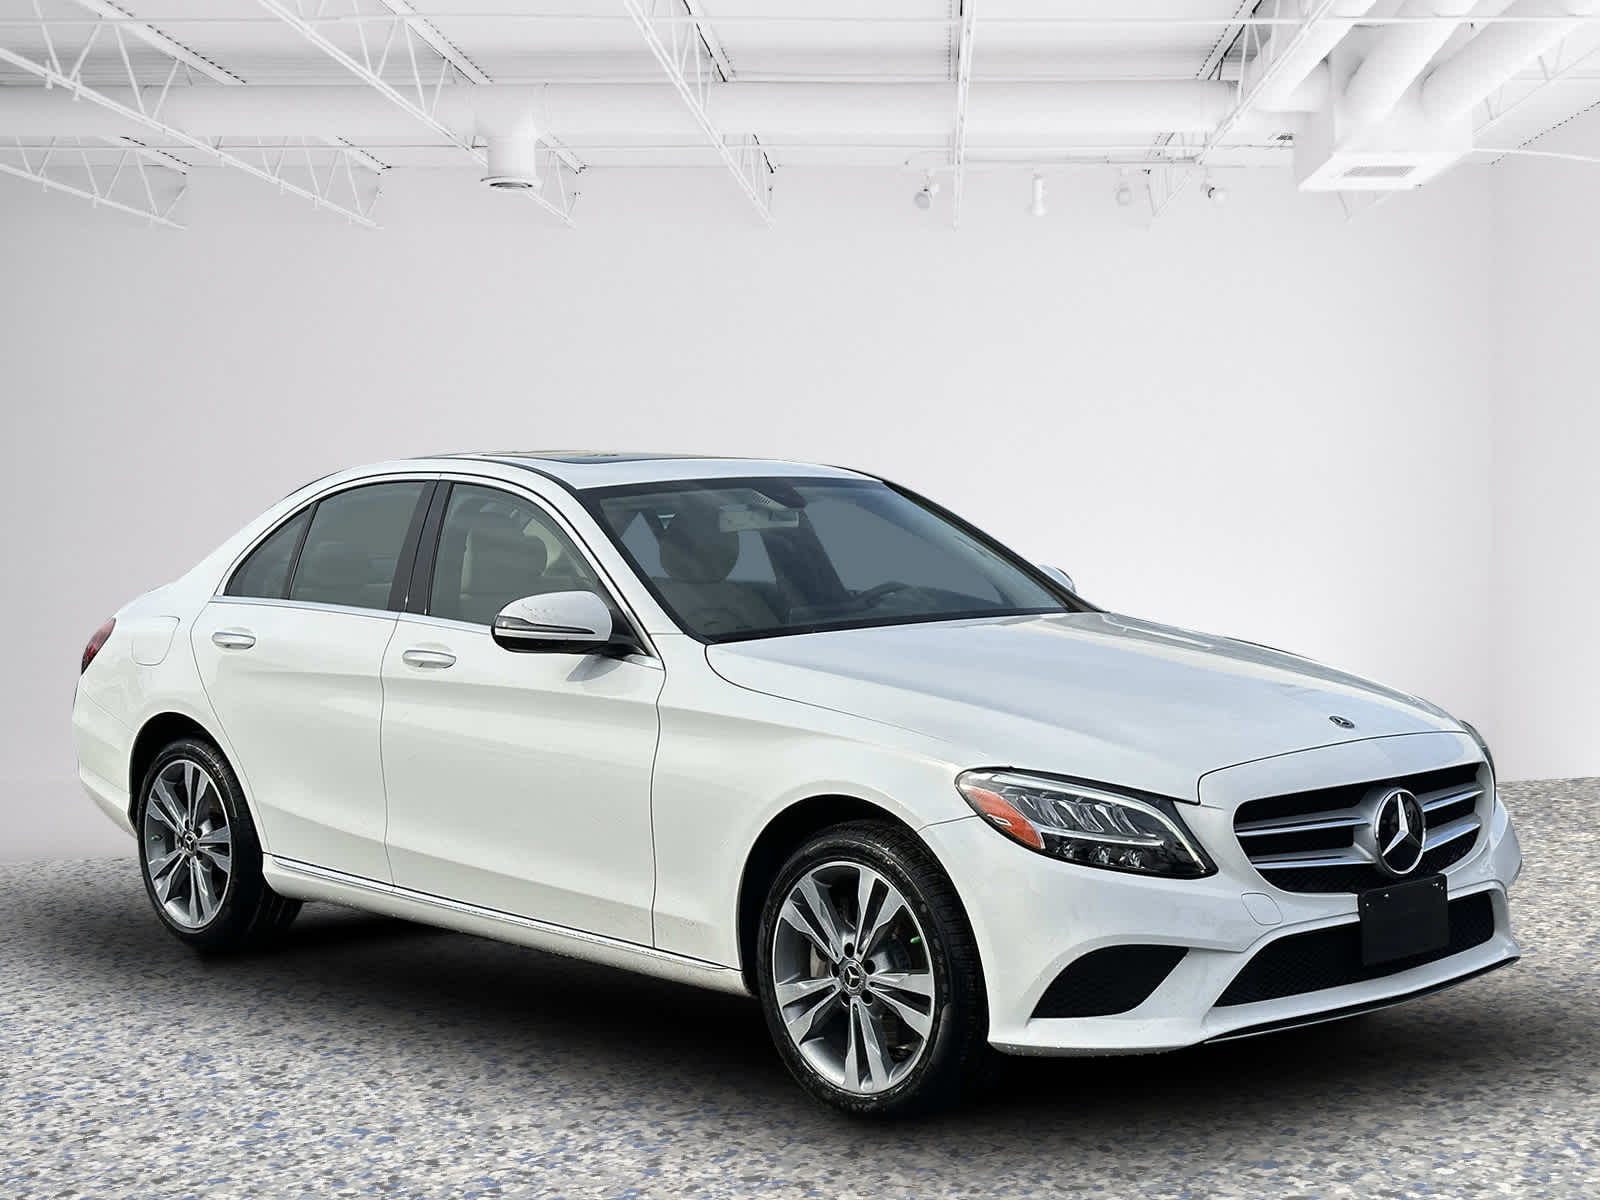 2020 Mercedes-Benz C-Class Owings Mills MD